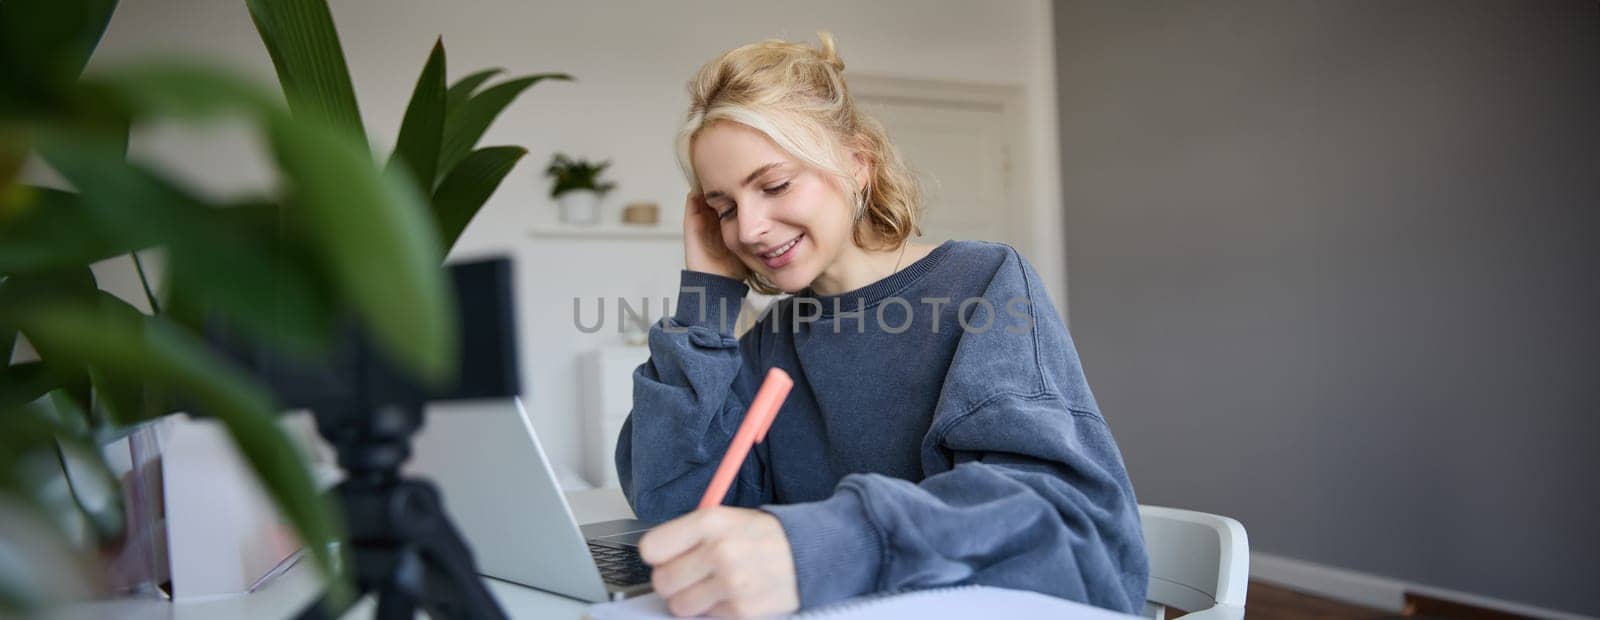 Cute smiling girl sits in a room, writes down notes, doing homework, records video of herself on digital camera, creates content for vlog, lifestyle blogger doing daily routine episode by Benzoix